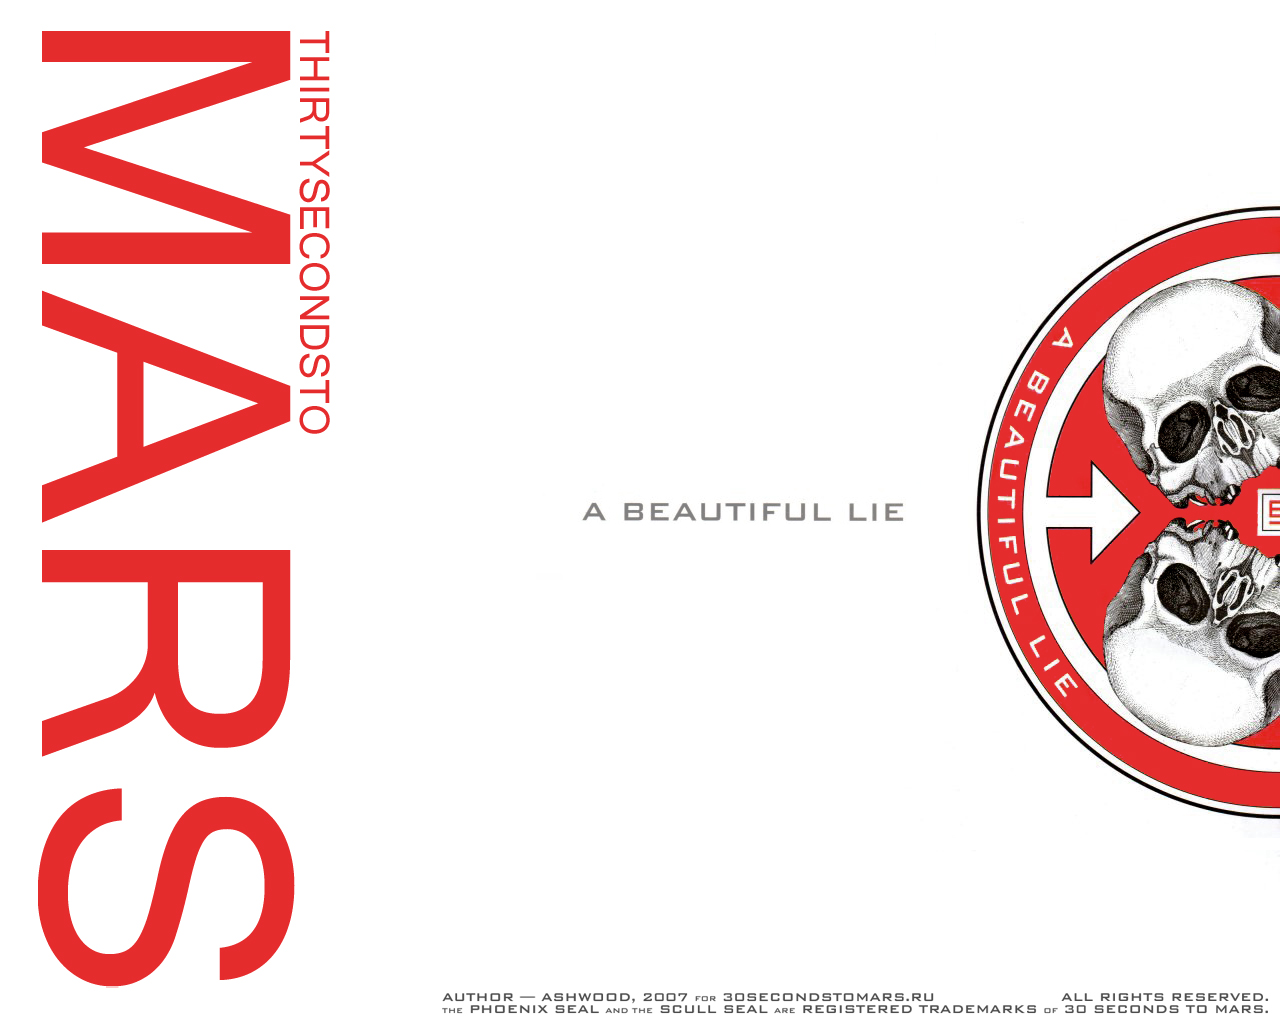 30 seconds to mars lie. 30 Seconds to Mars обложки альбомов. 30 Seconds to Mars обложка. 30 Seconds to Mars a beautiful Lie обложка. 30 Seconds to Mars альбом 2002.